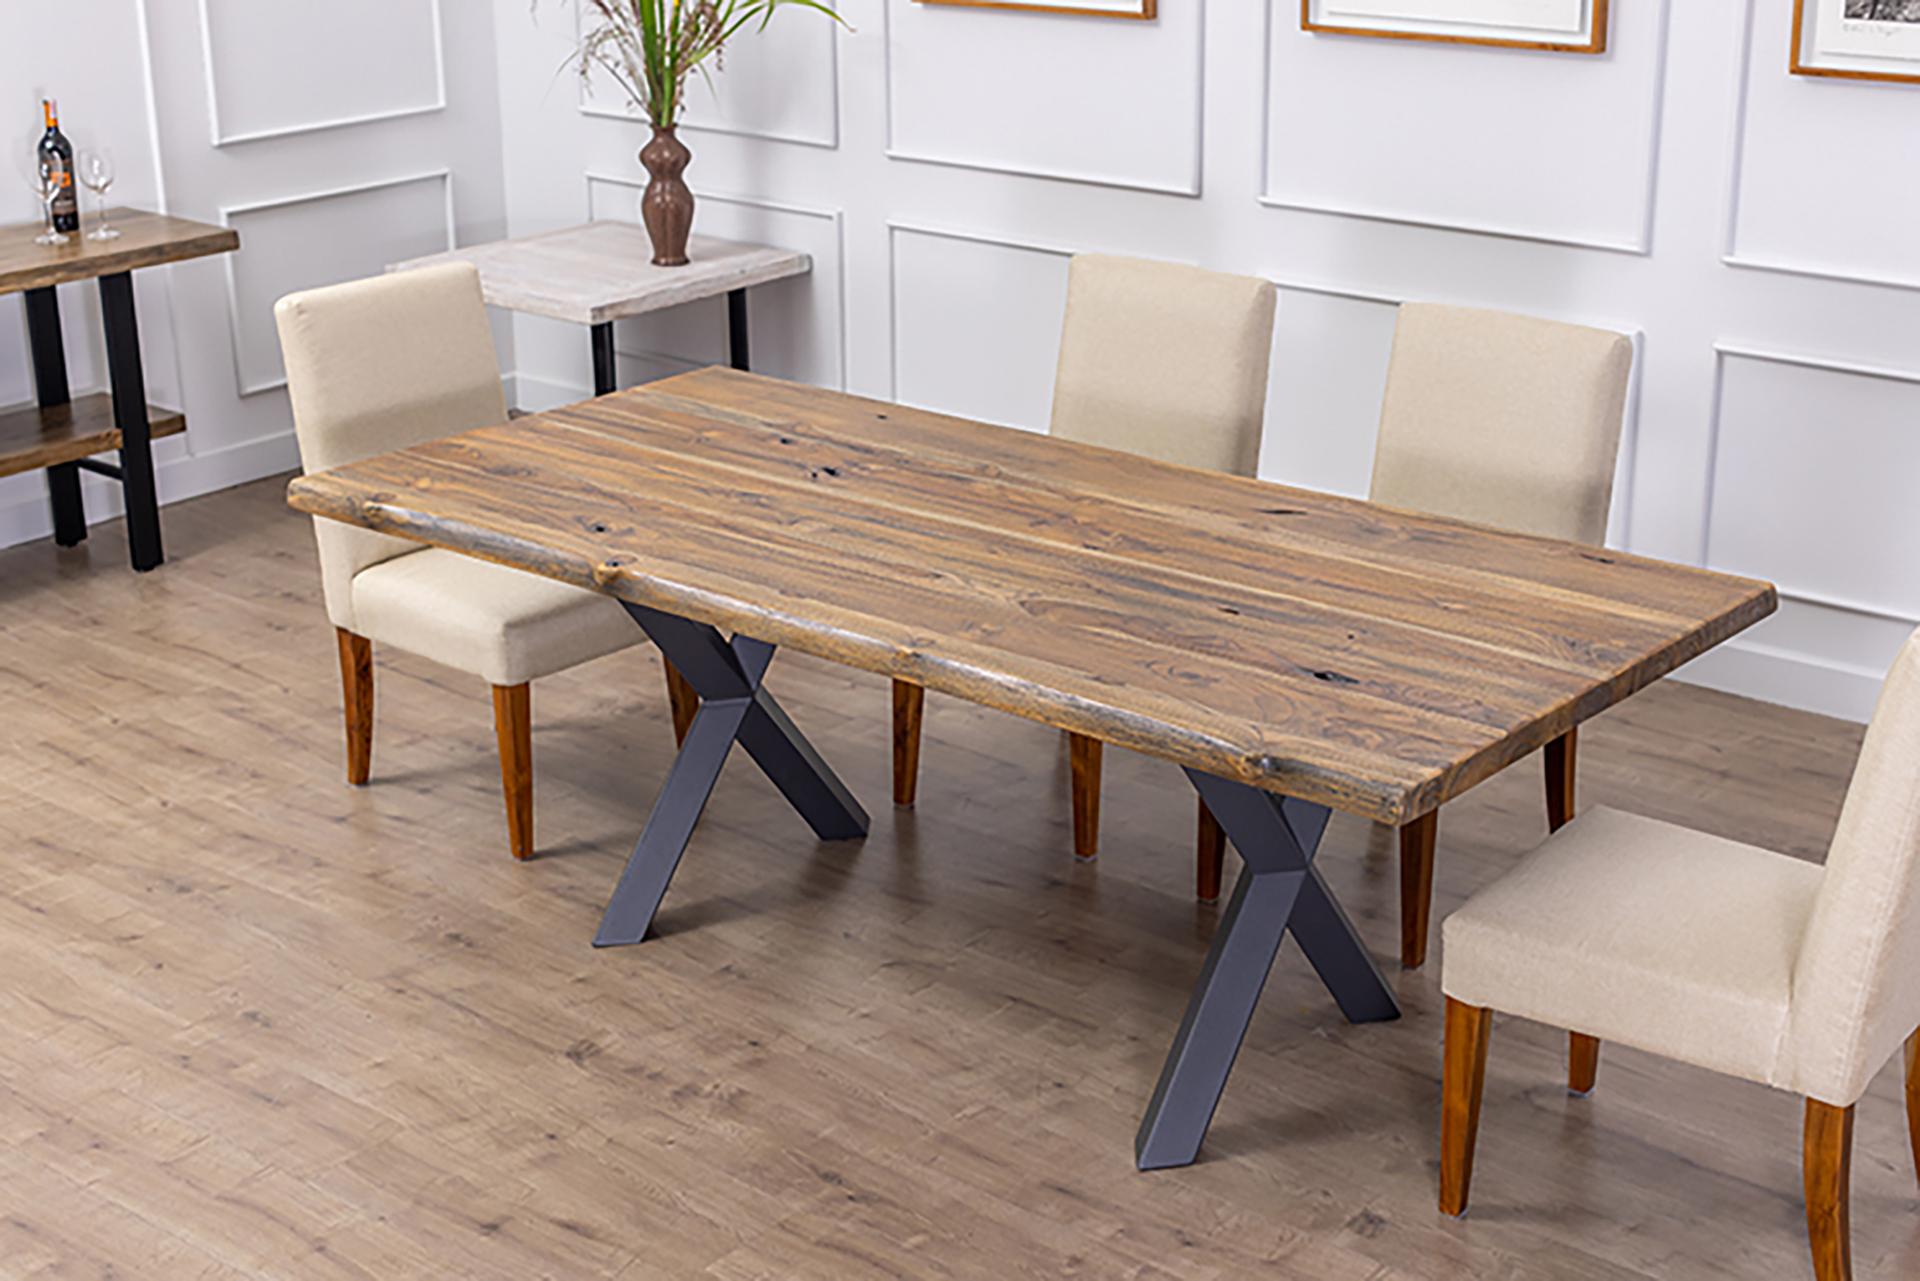 Each piece is hand-crafted with the care deserving of the centerpiece of your home. Crafted out of 100% solid teak, this table celebrates all the natural imperfections with our Autumn Organic Distressed finish.  Measures: 96x40.
All of our teak is